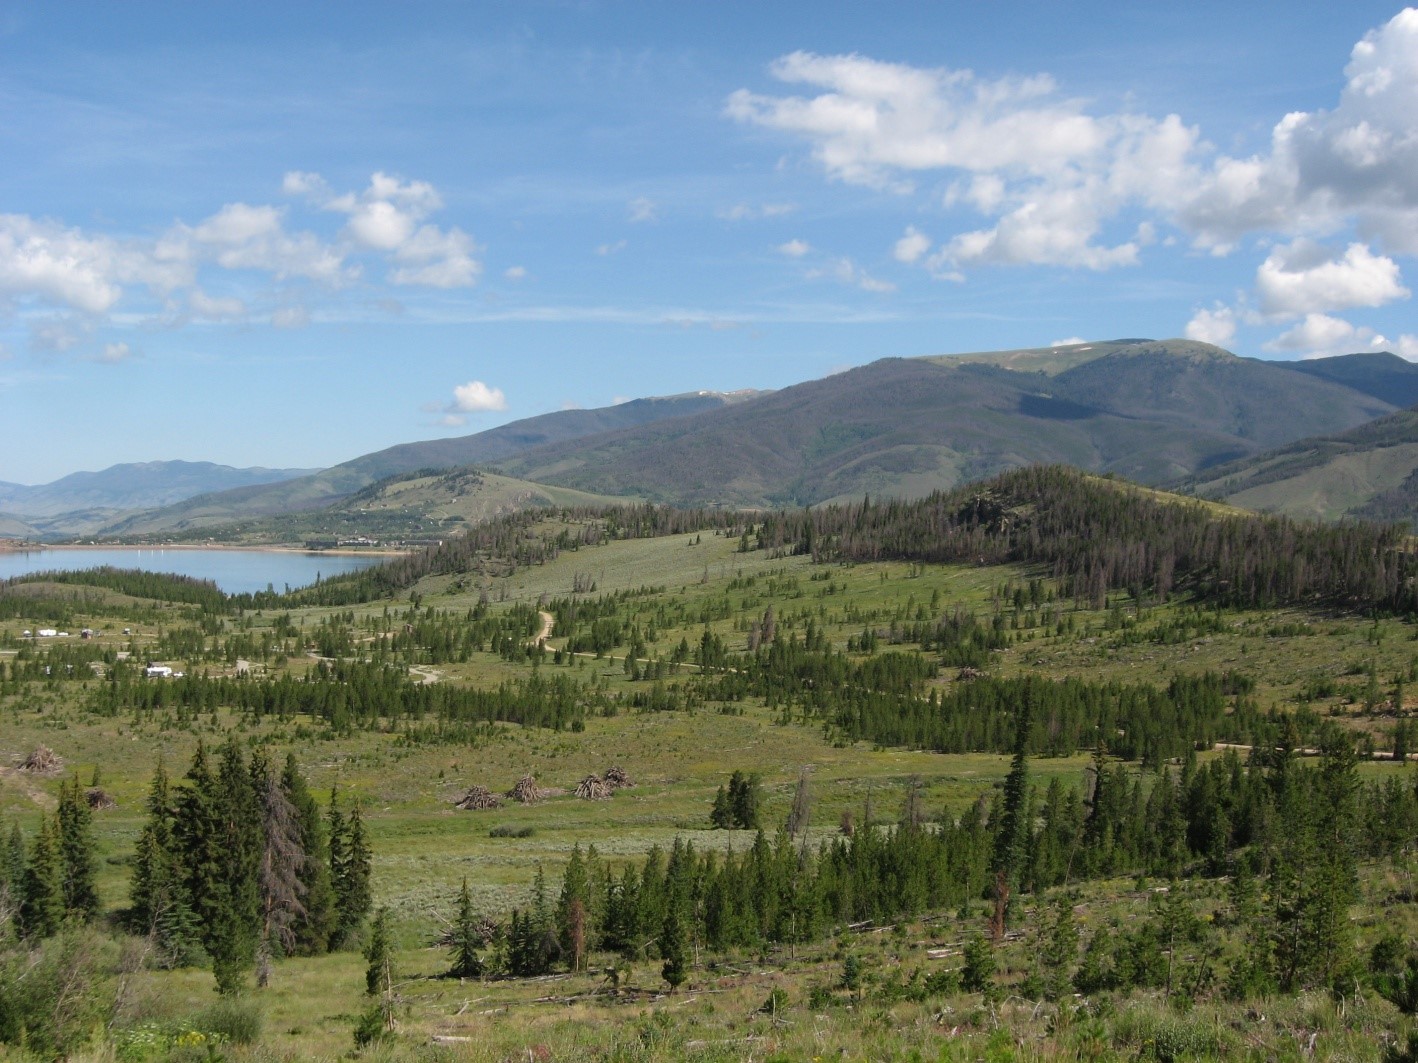 Treated White River National Forest with Dillon Reservoir in the background.